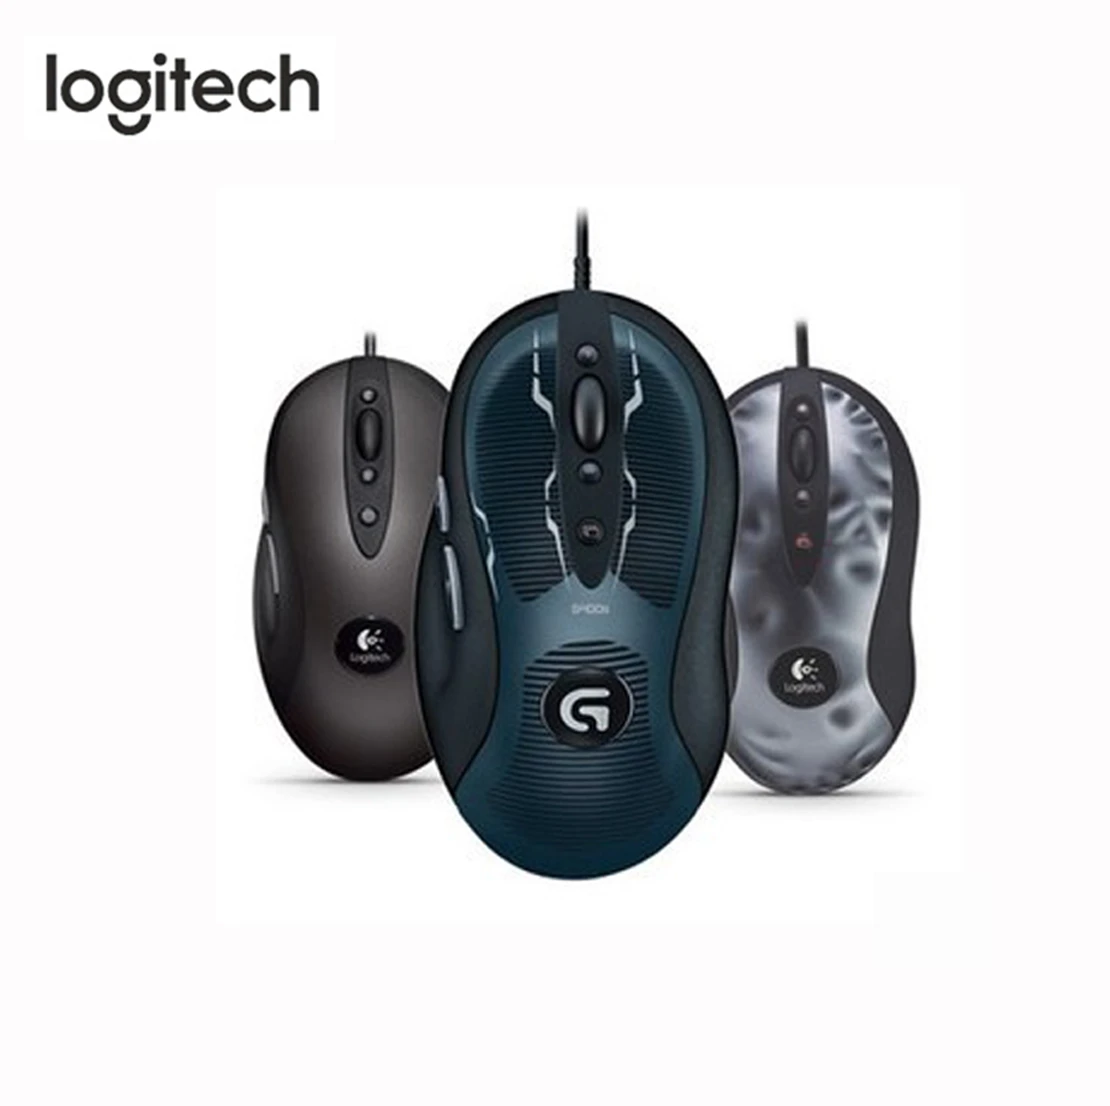 Original Logitech MX518 G400s Legendary Gaming Mouse with HERO Engine 16000DPI Classic Mouse Legend Reborn for Mouse Gamer